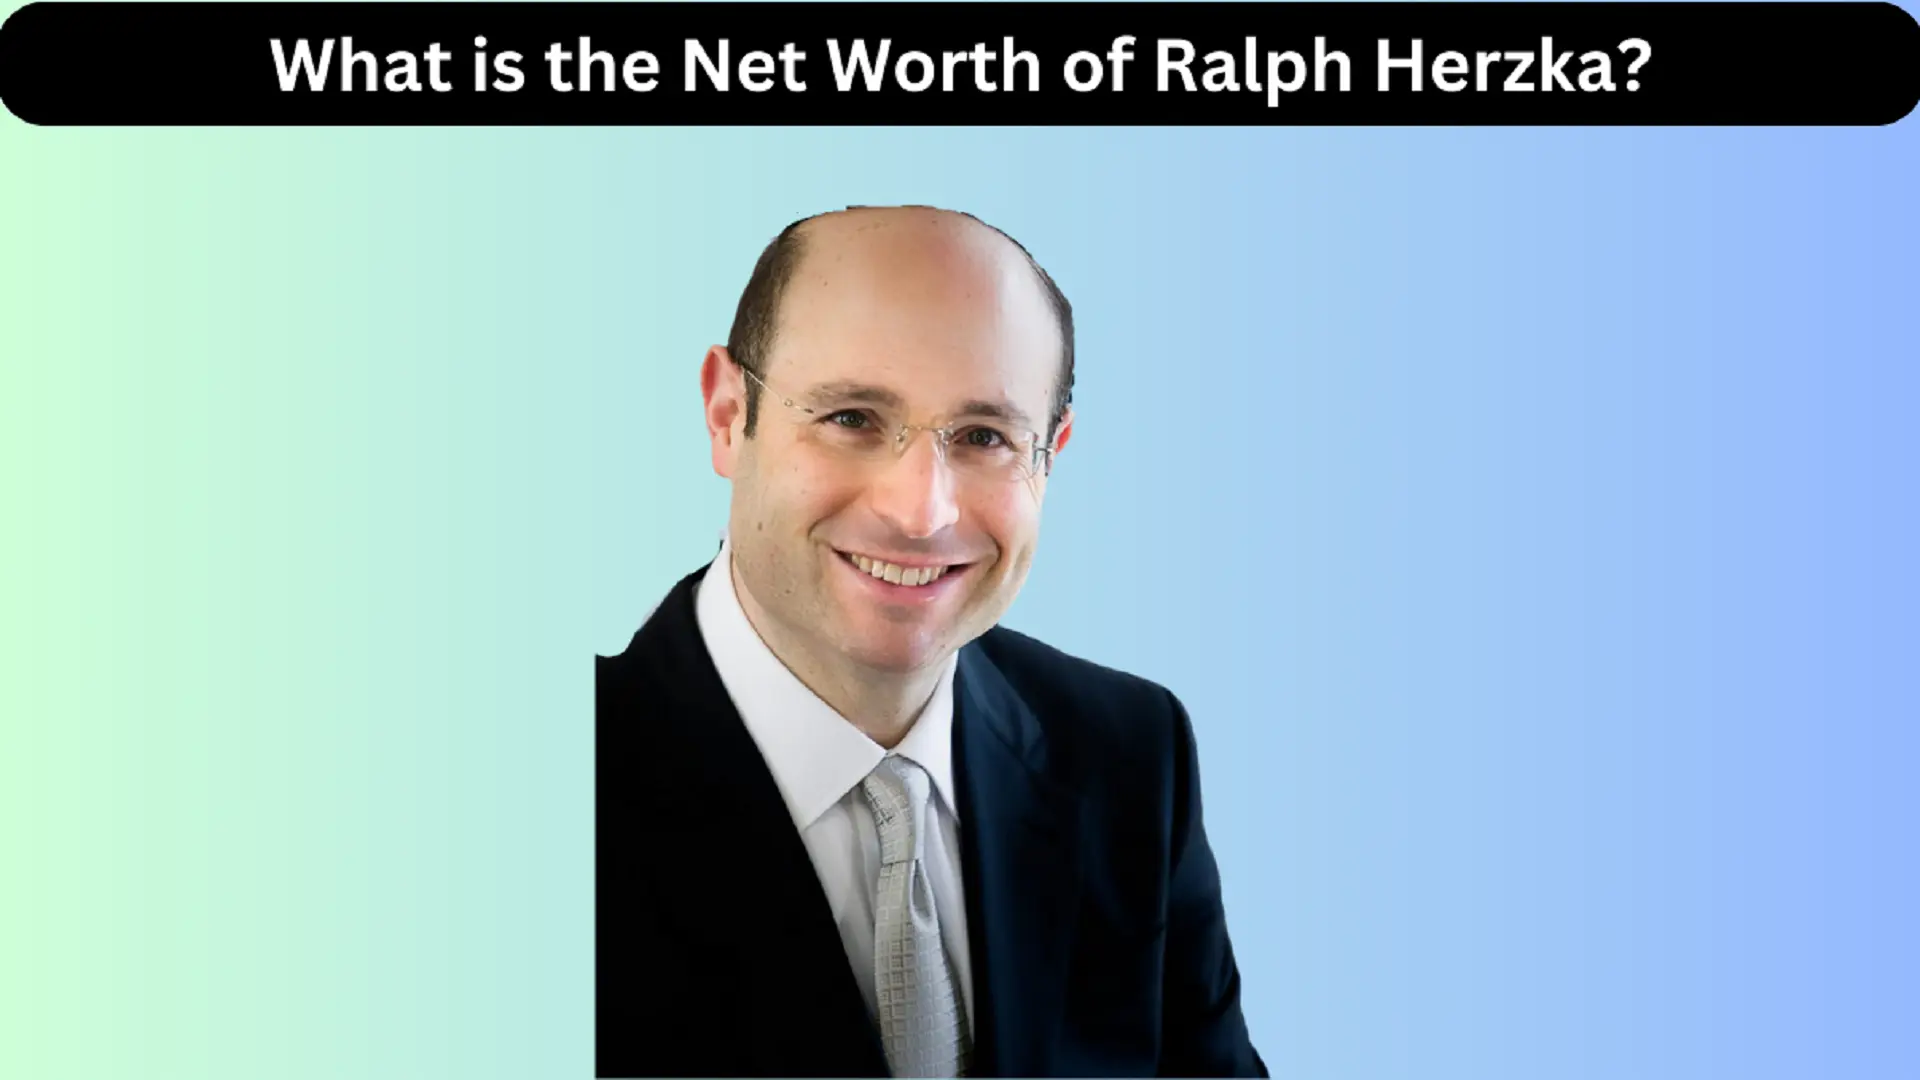 What is the Net Worth of Ralph Herzka